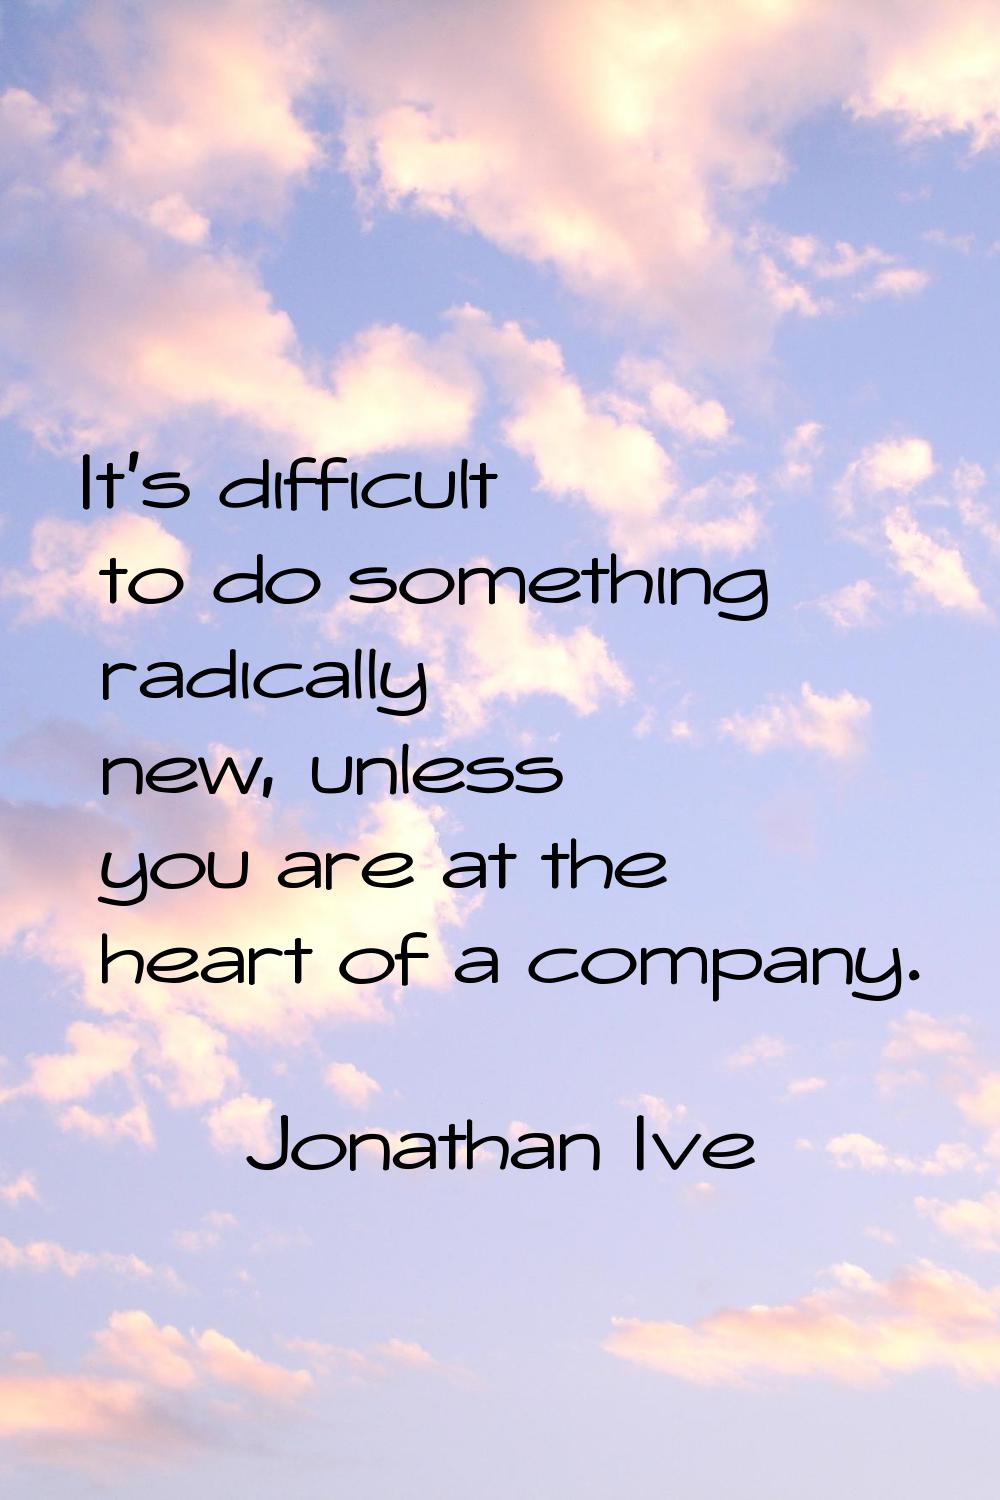 It's difficult to do something radically new, unless you are at the heart of a company.